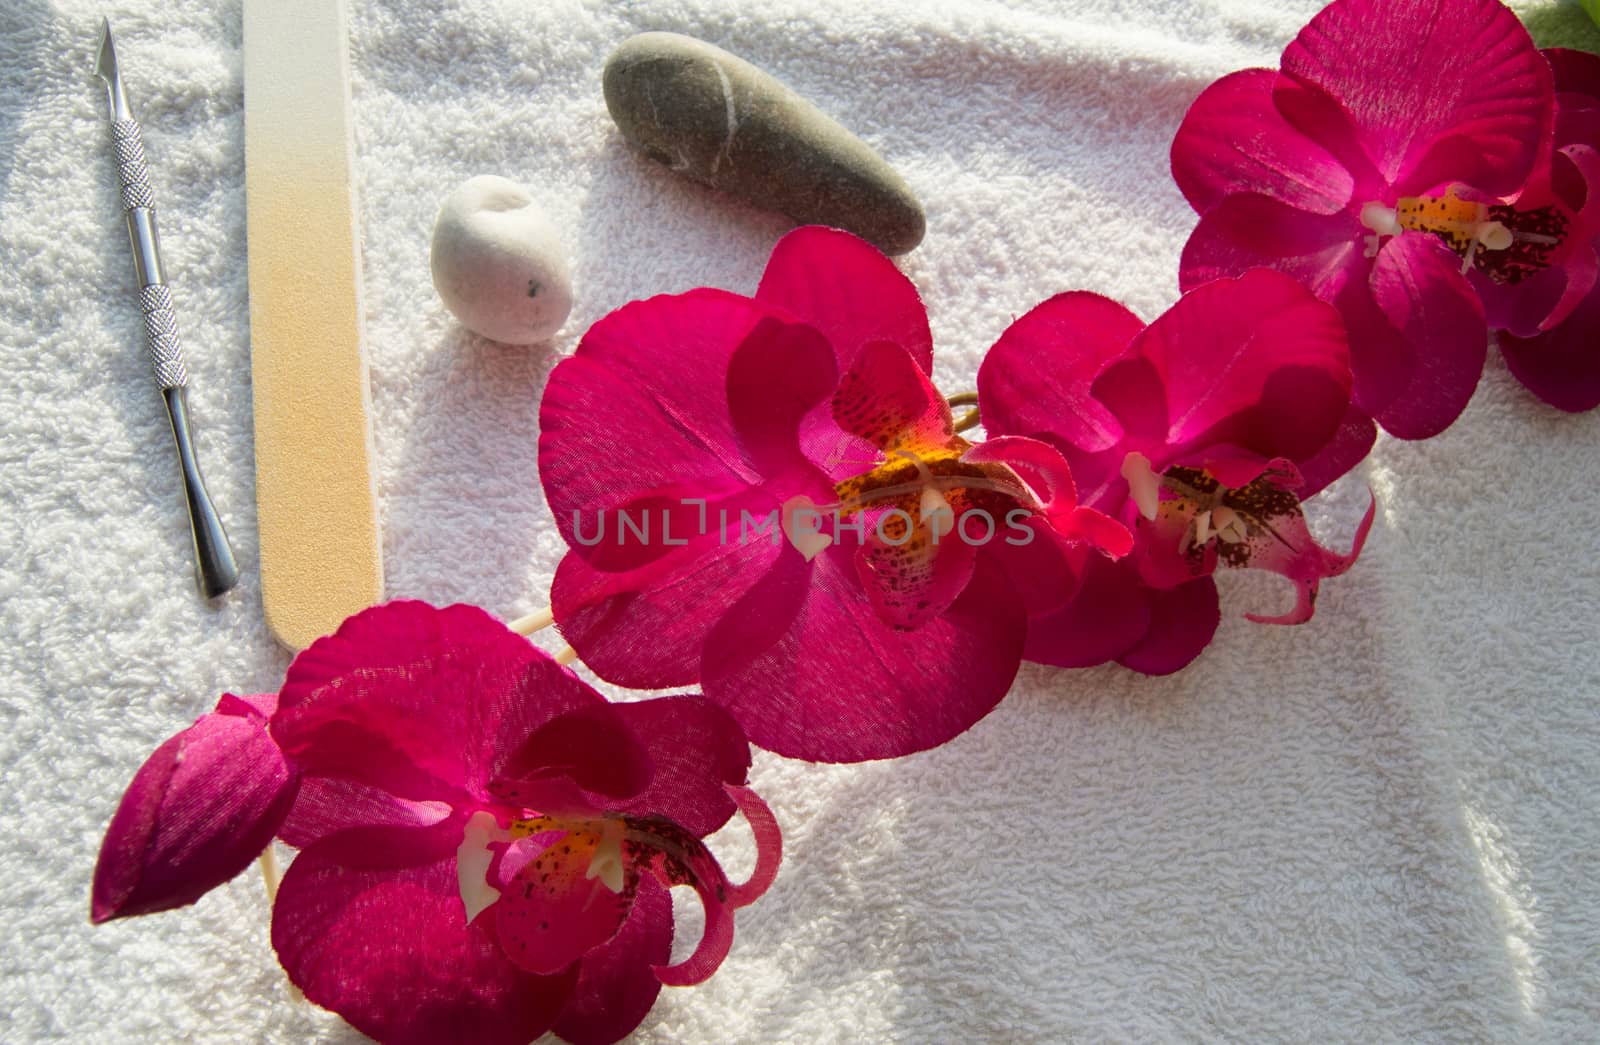 Accessories and tools for Spa manicure, Orchid and stones on white background by claire_lucia